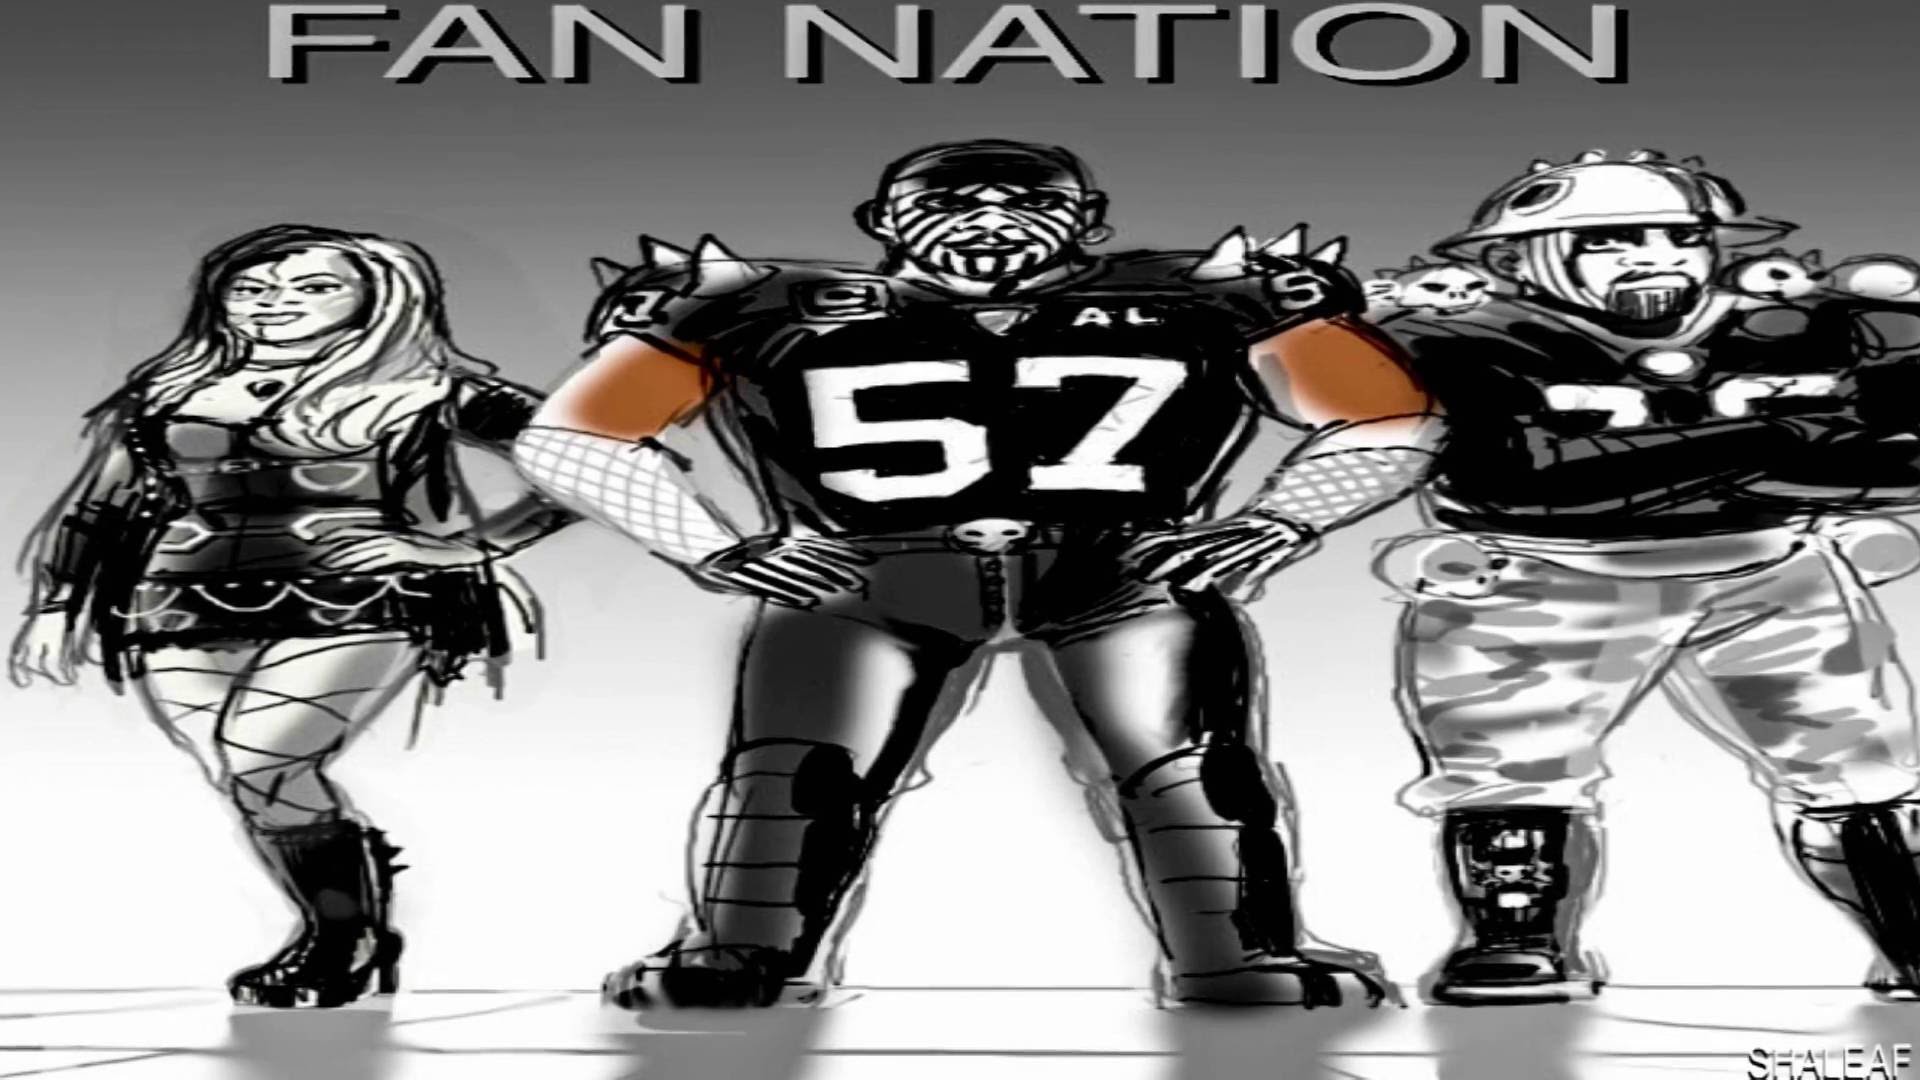 1920x1080 FAN NATION.....can the WORLDWIDE RAIDER NATION save a innocent kid from  harm....tune in